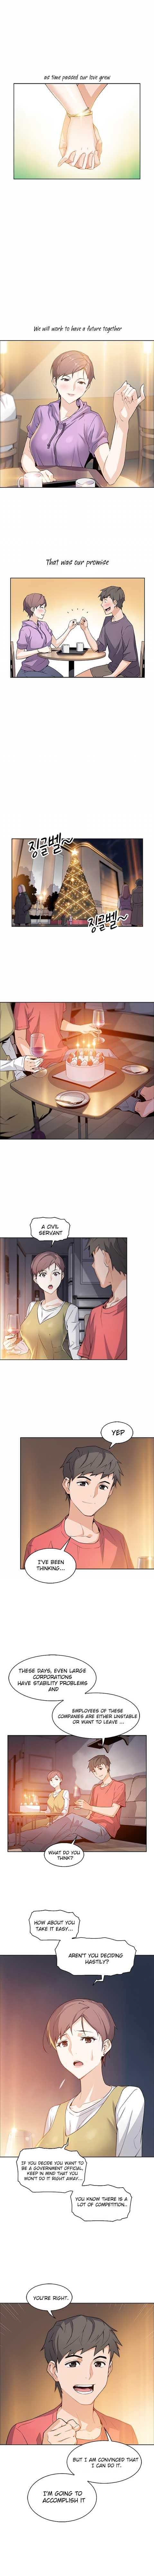 Vip Housekeeper [Neck Pillow, Paper] Ch.49/49 [English] [Manhwa PDF] Completed Stud - Page 4